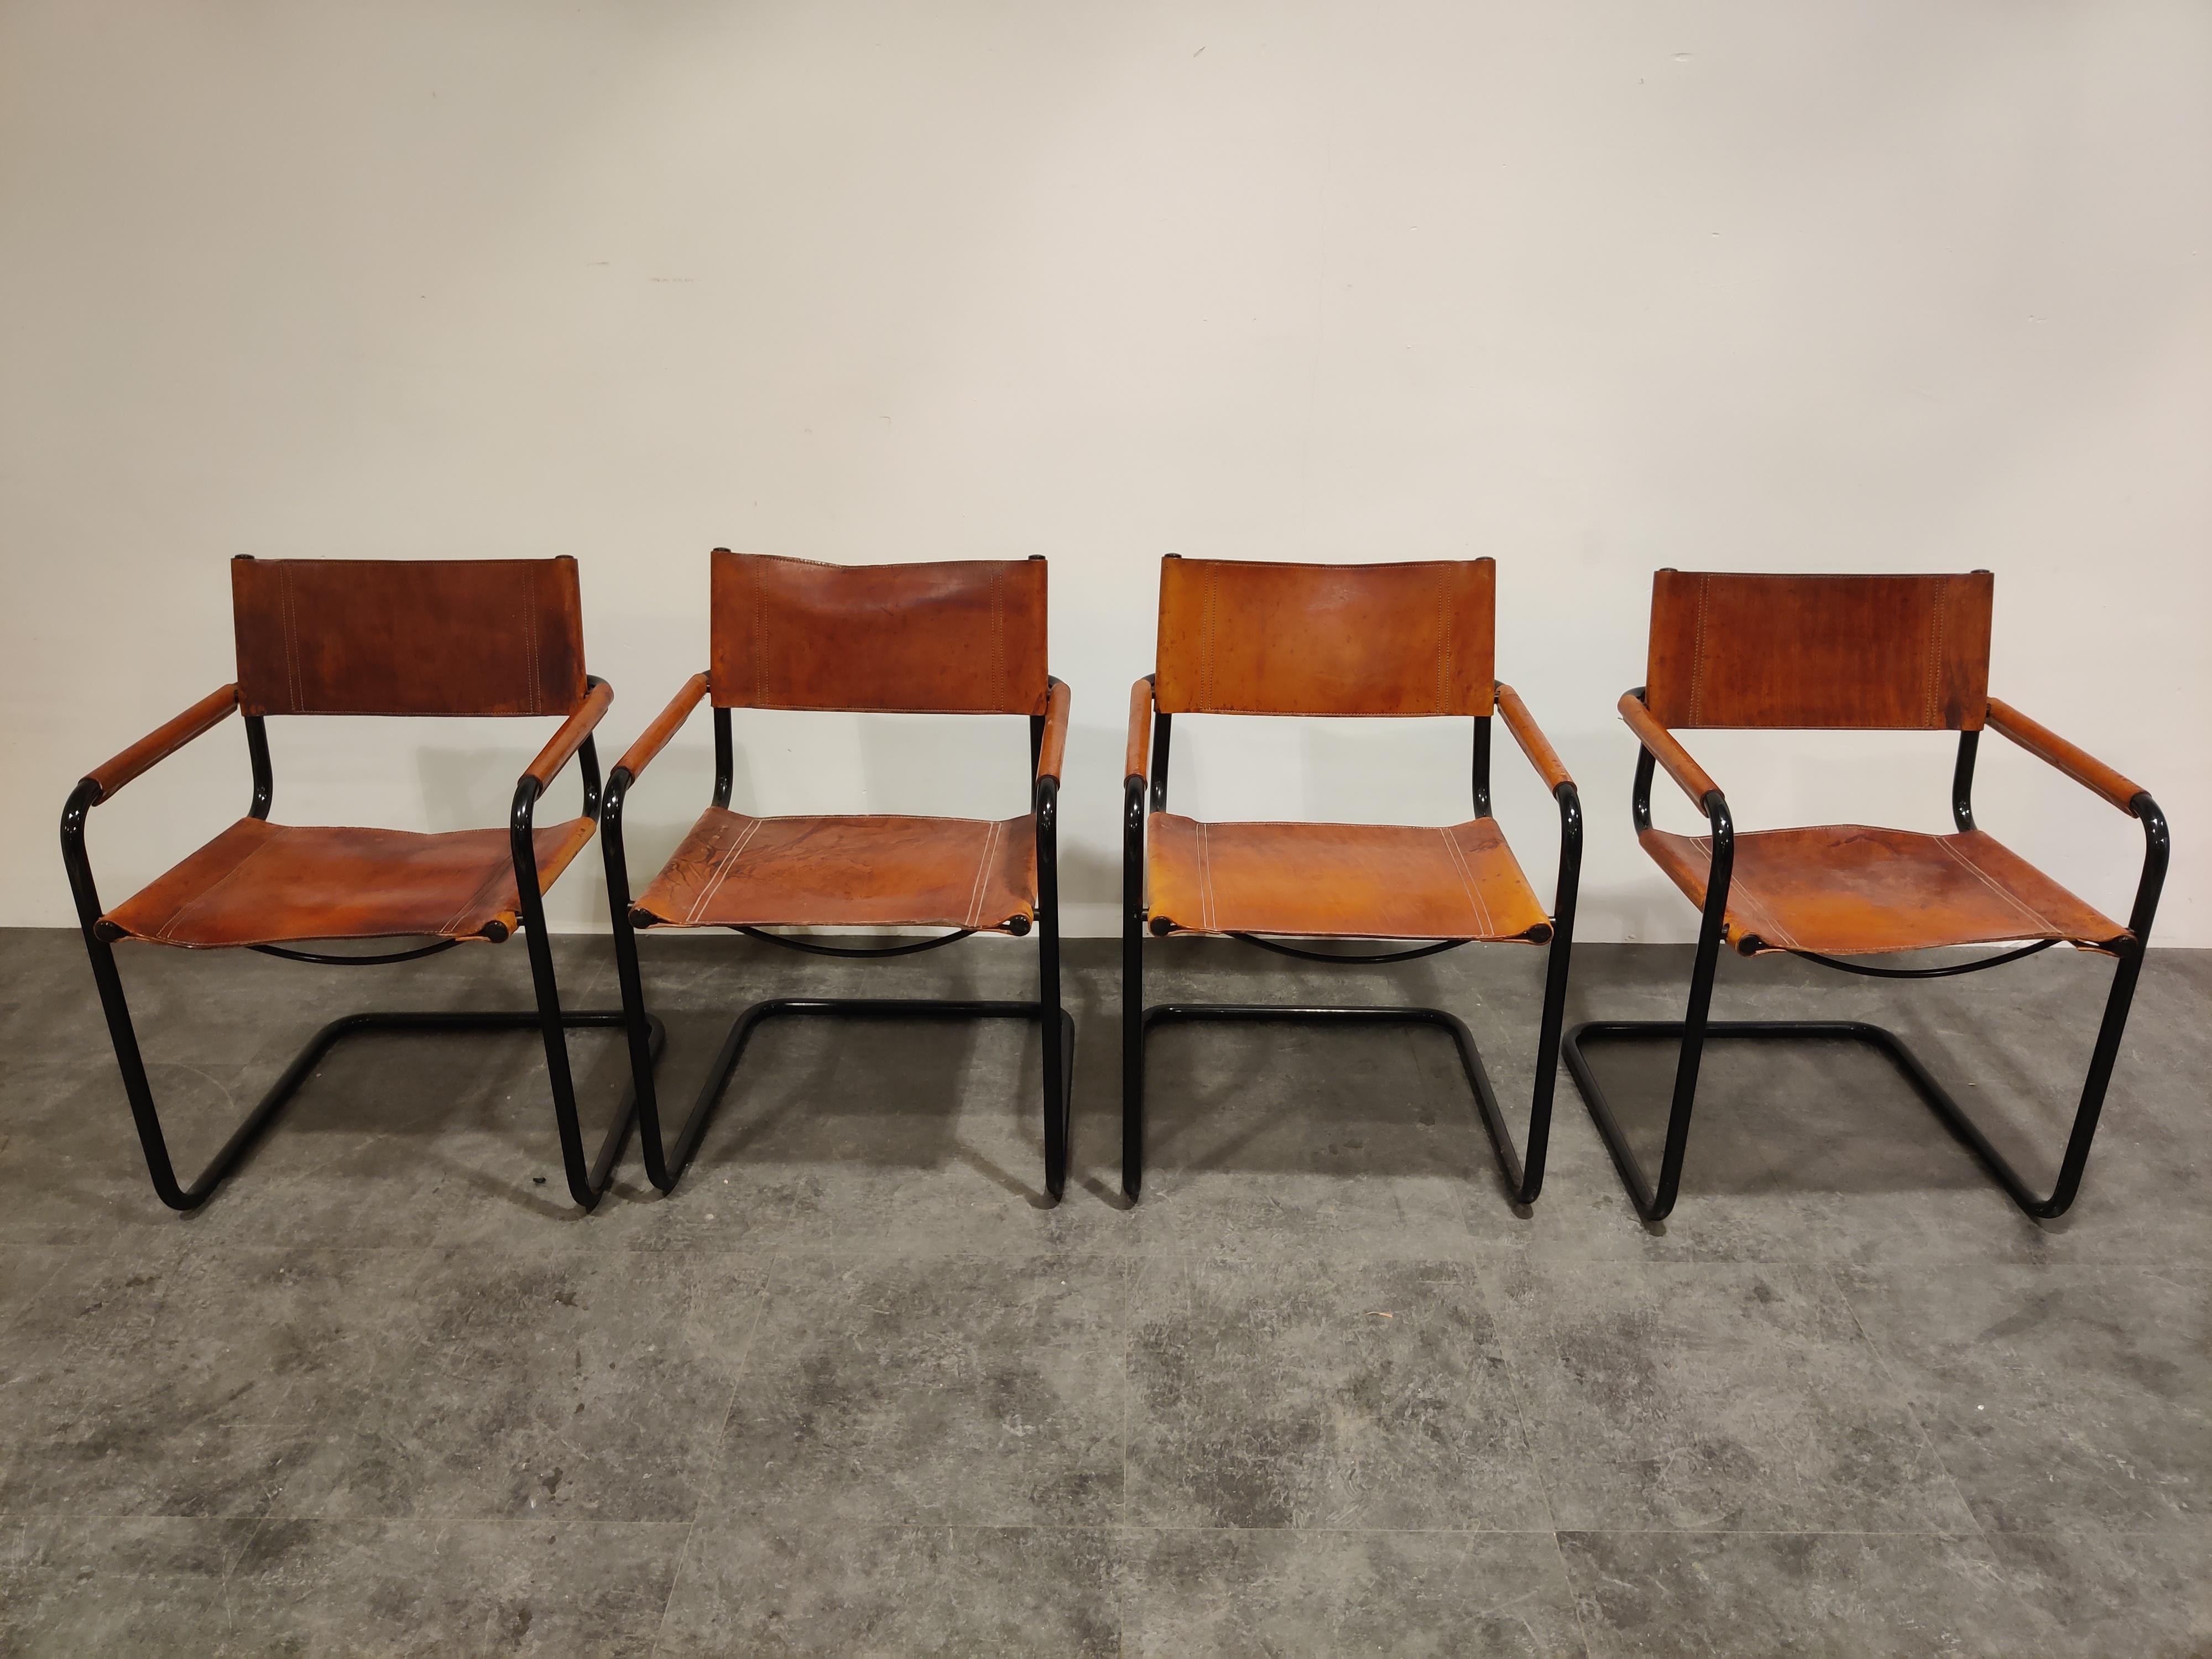 Vintage cantilever dining chairs or armchairs designed by Mart Stam in the 1930s.

These are 1980s editions produced by Fasem.

They come with thick and strong brown leather mounted on a black lacquered metal frame.

The chairs also have